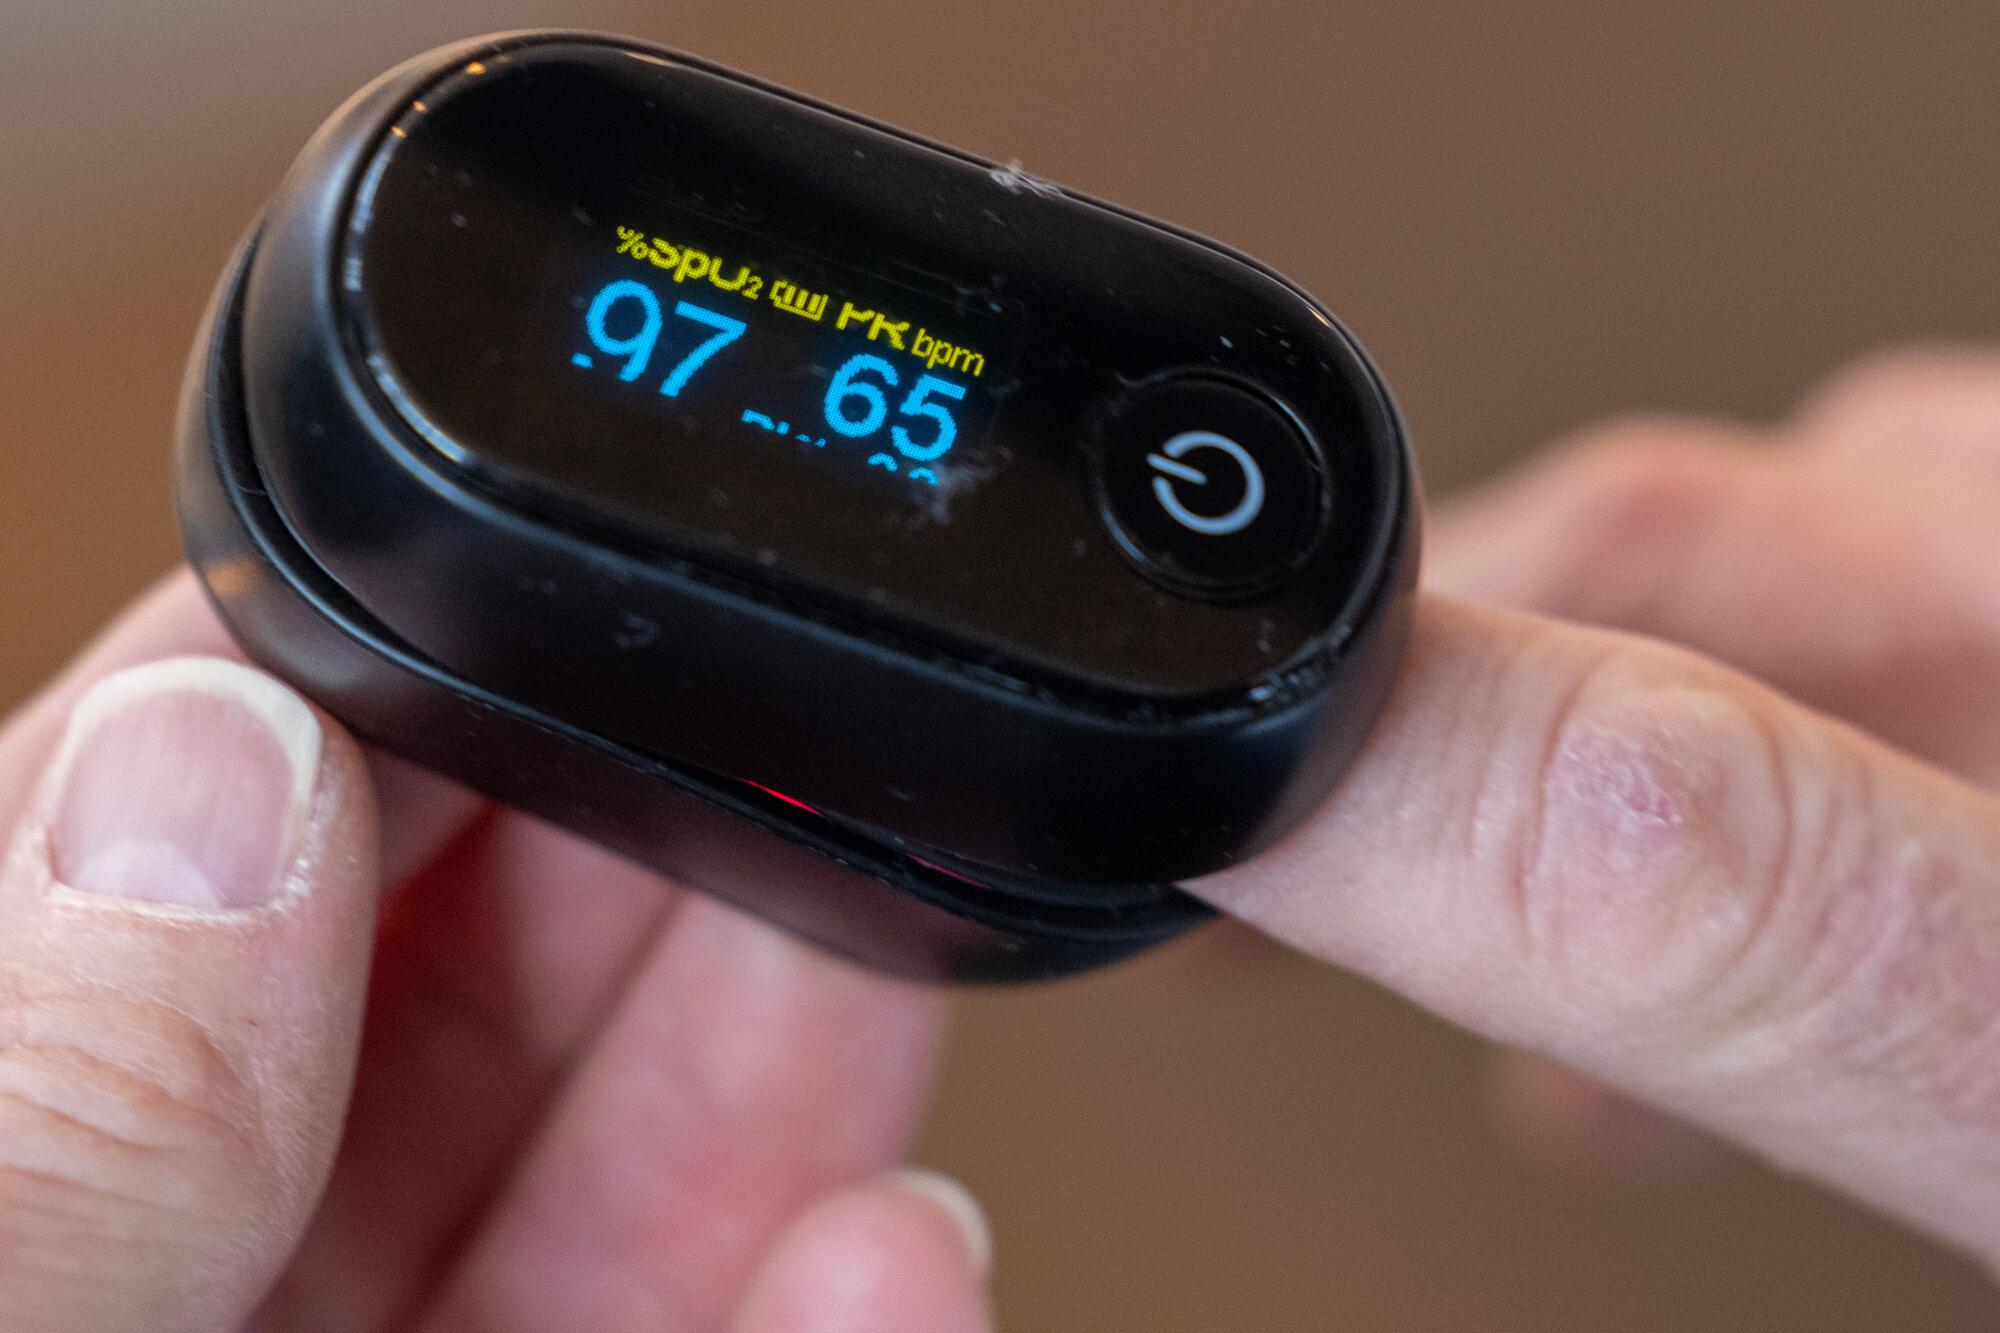 A close-up view of a pulse oximeter on a person's finger.